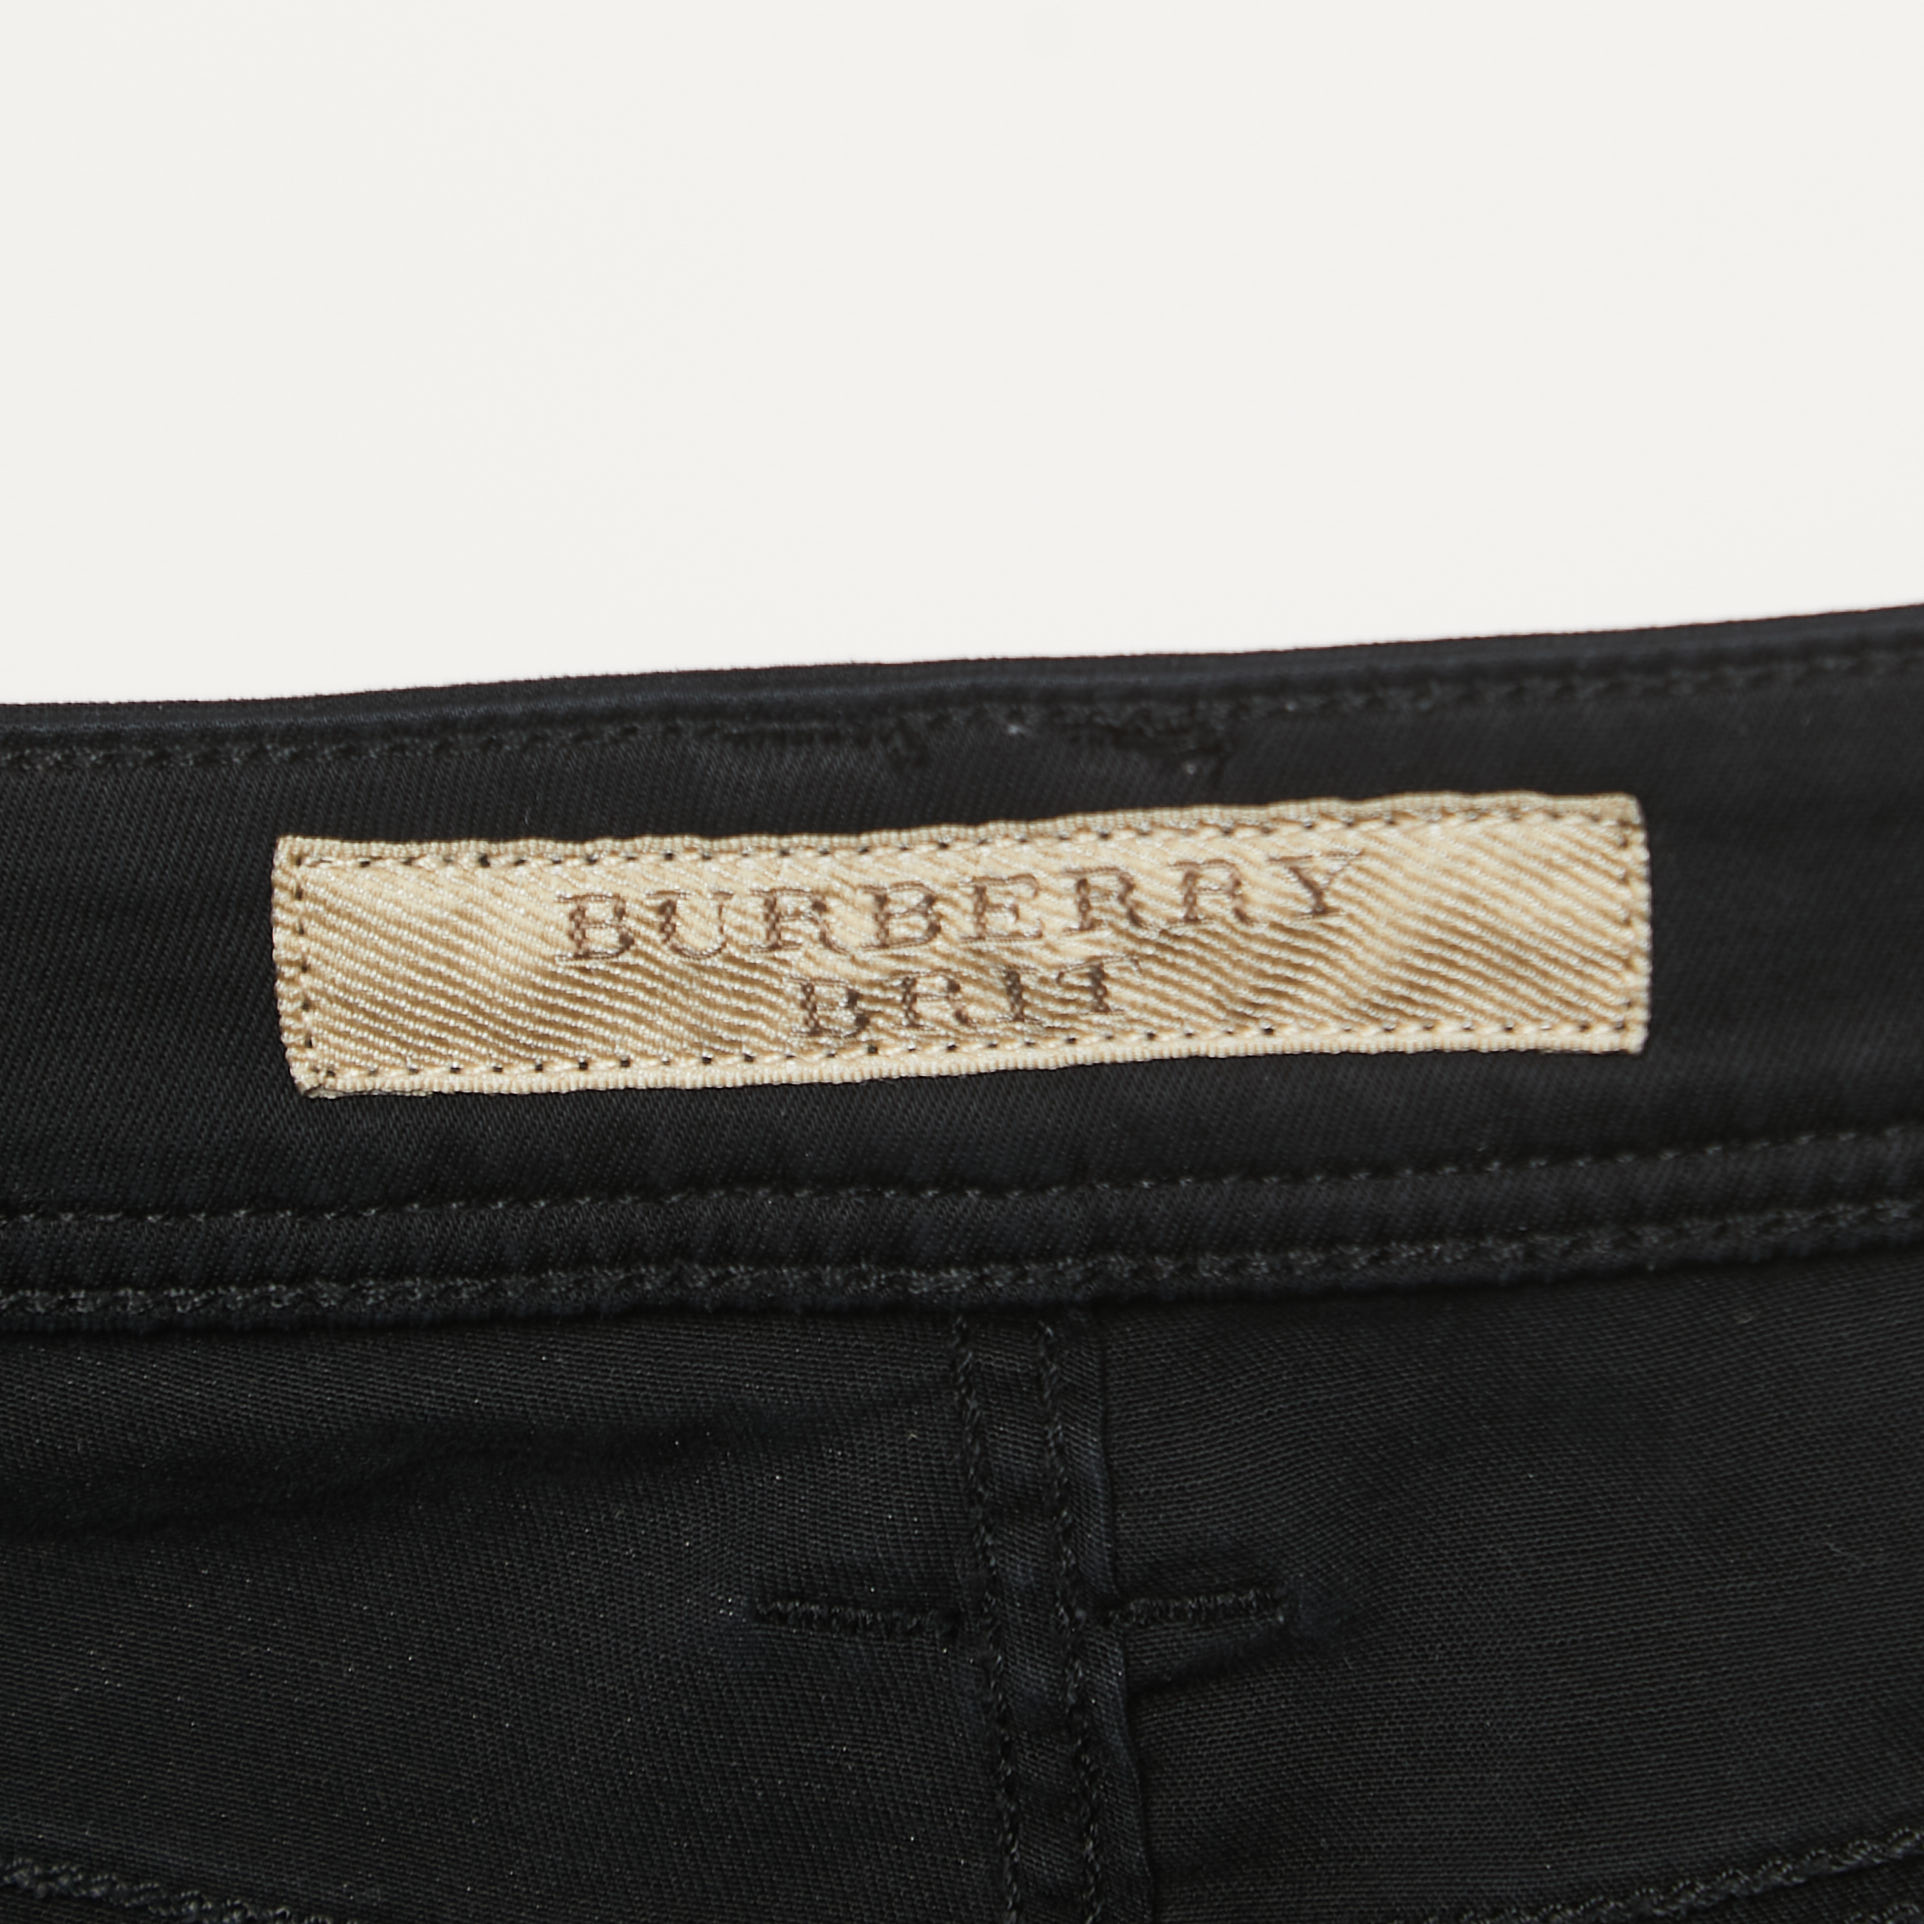 Burberry Brit Black Synthetic Coated Low Rise Jeans L Waist 32